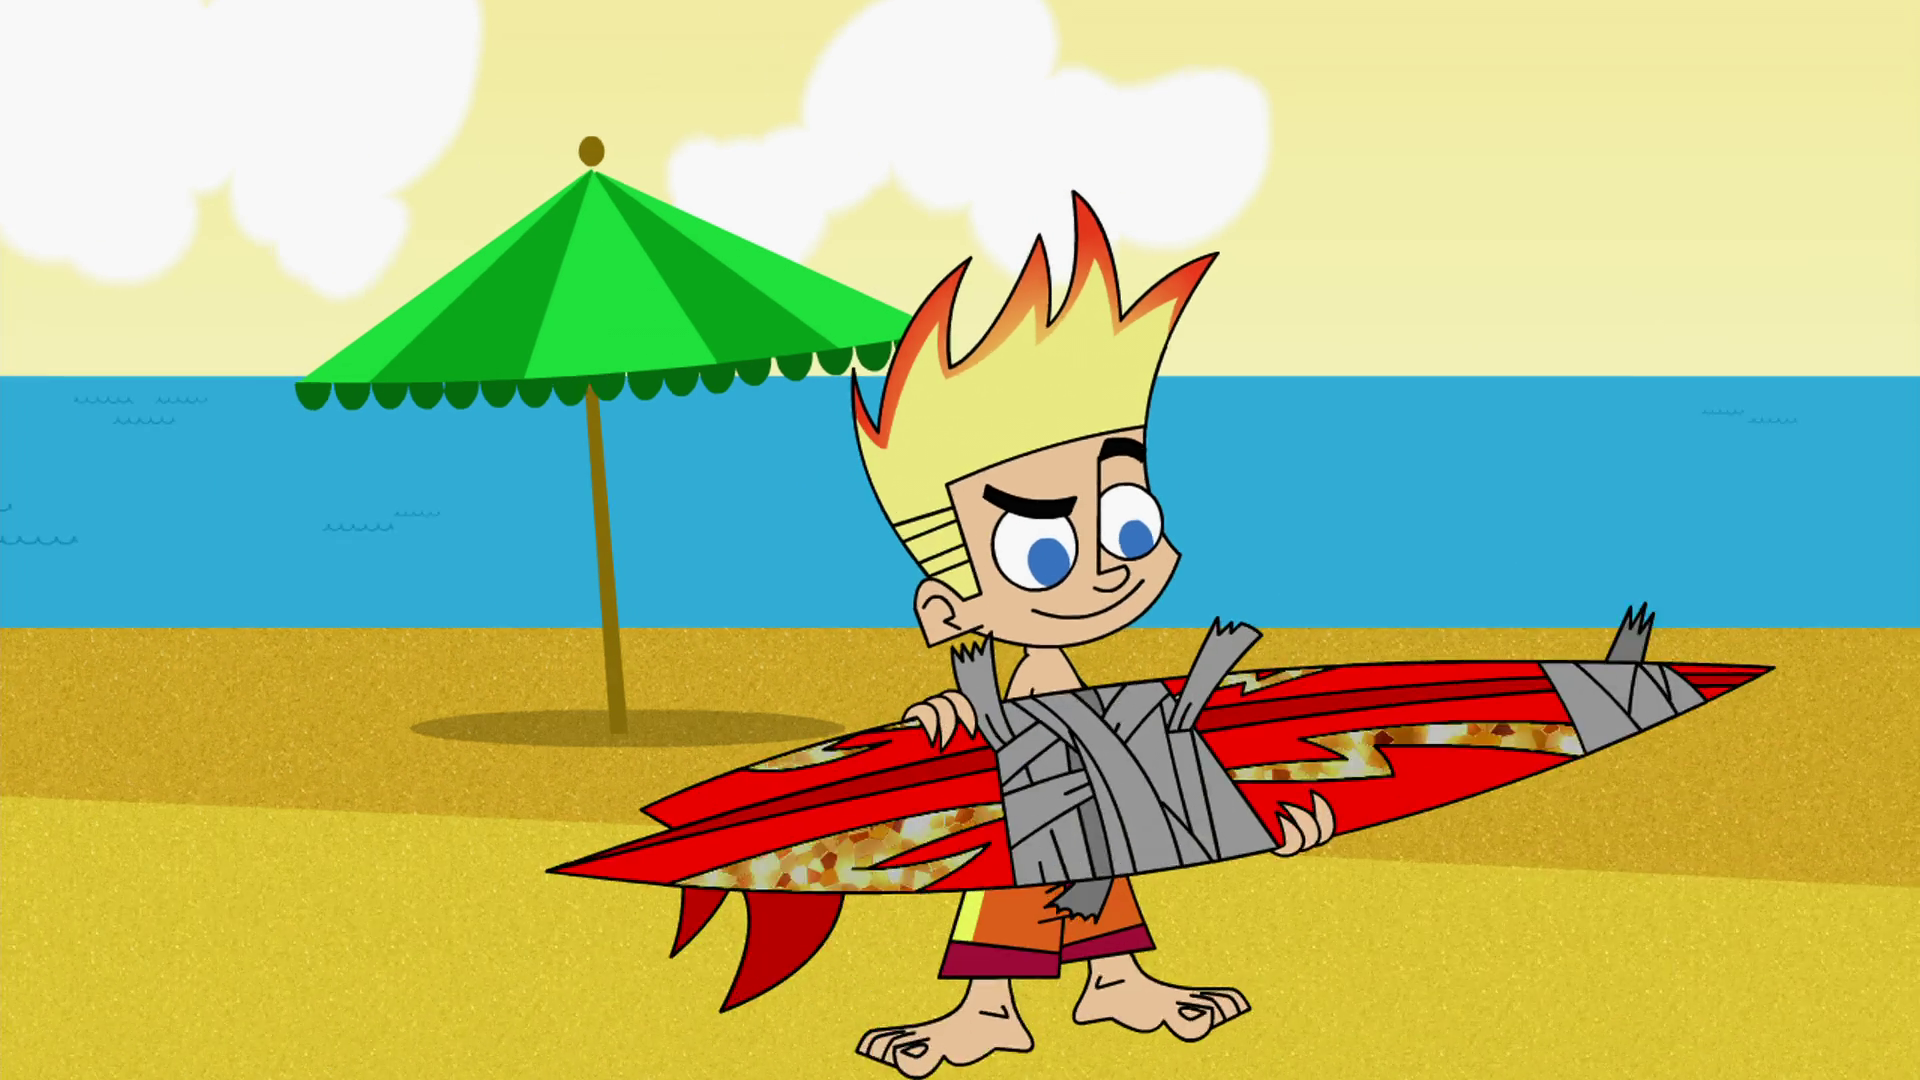 Johnny Test S04 1080p Nf Web Dl Dd5 1 X264 Alfahd 16 1 Gb Download Movies And